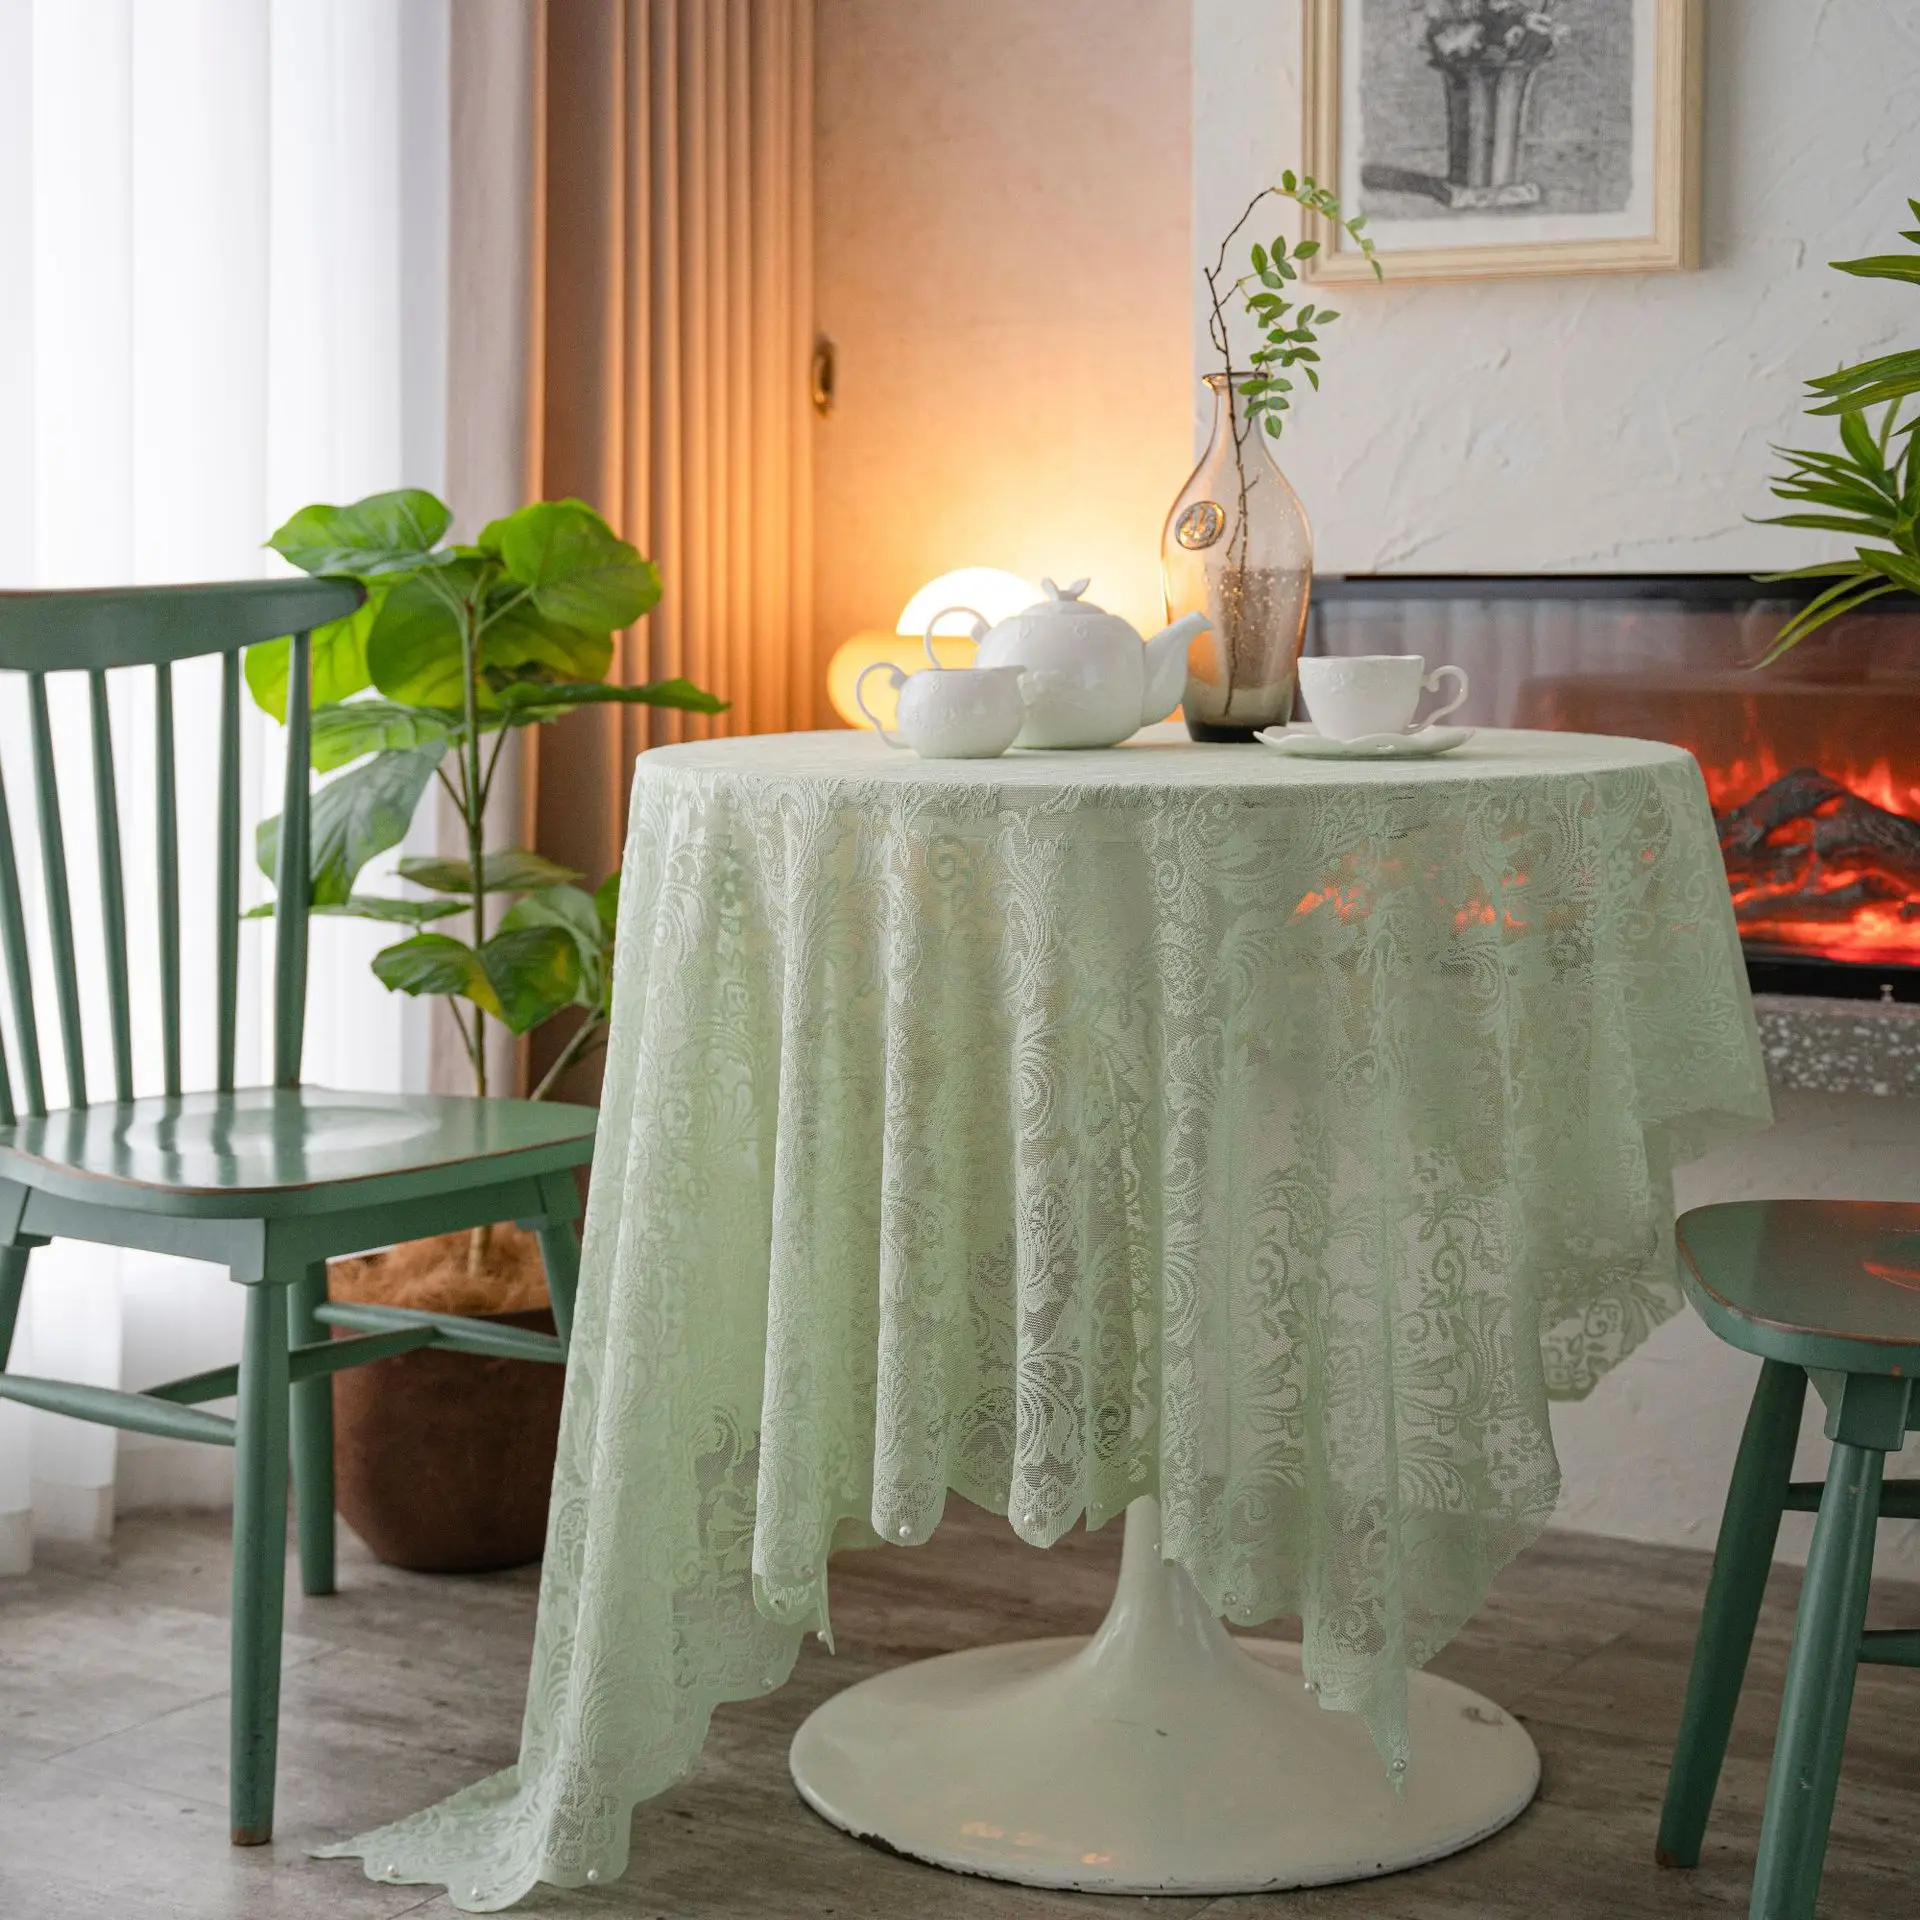 

Sage Green Nailed Bead Tablecloth Vintage Lace Rectangular Embroidered Tablecloth for Valentine's Day Wedding Decoration